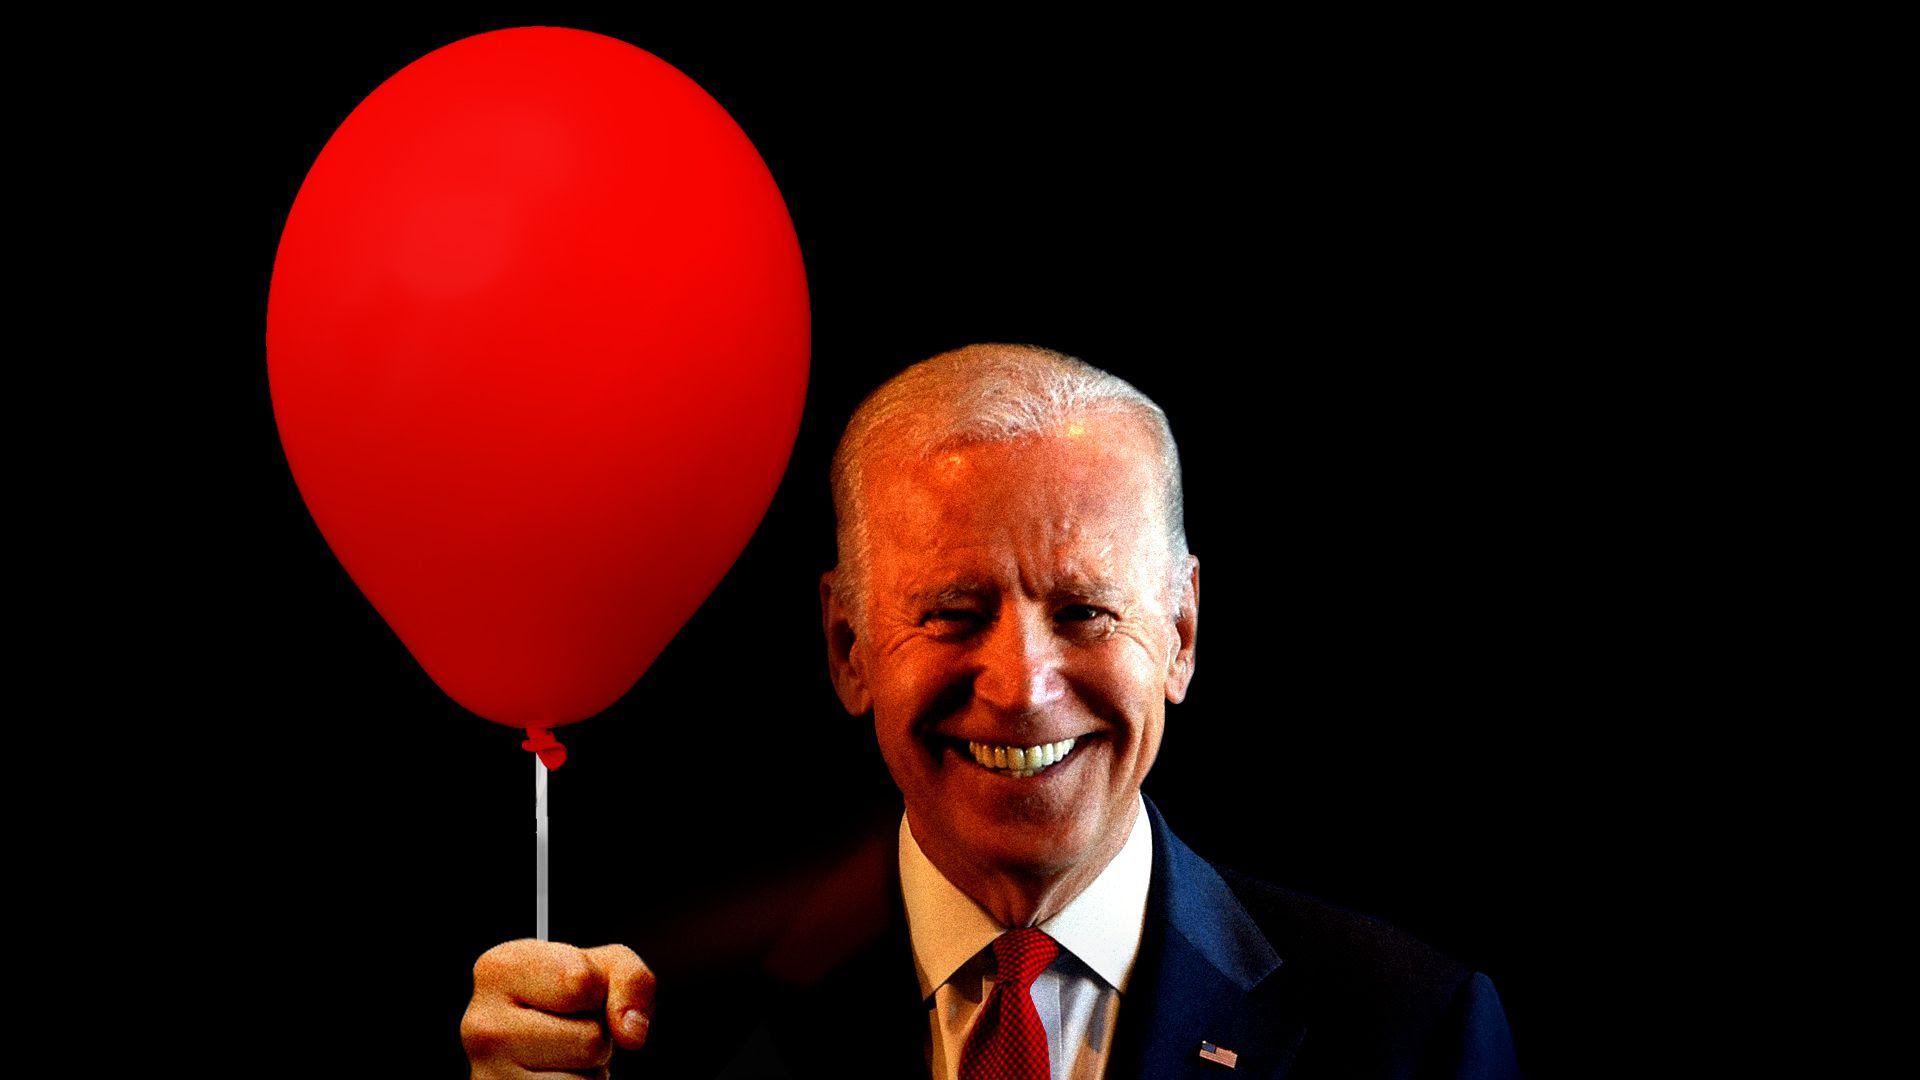 Illustration of Biden holding a red balloon, like the from the movie "It"